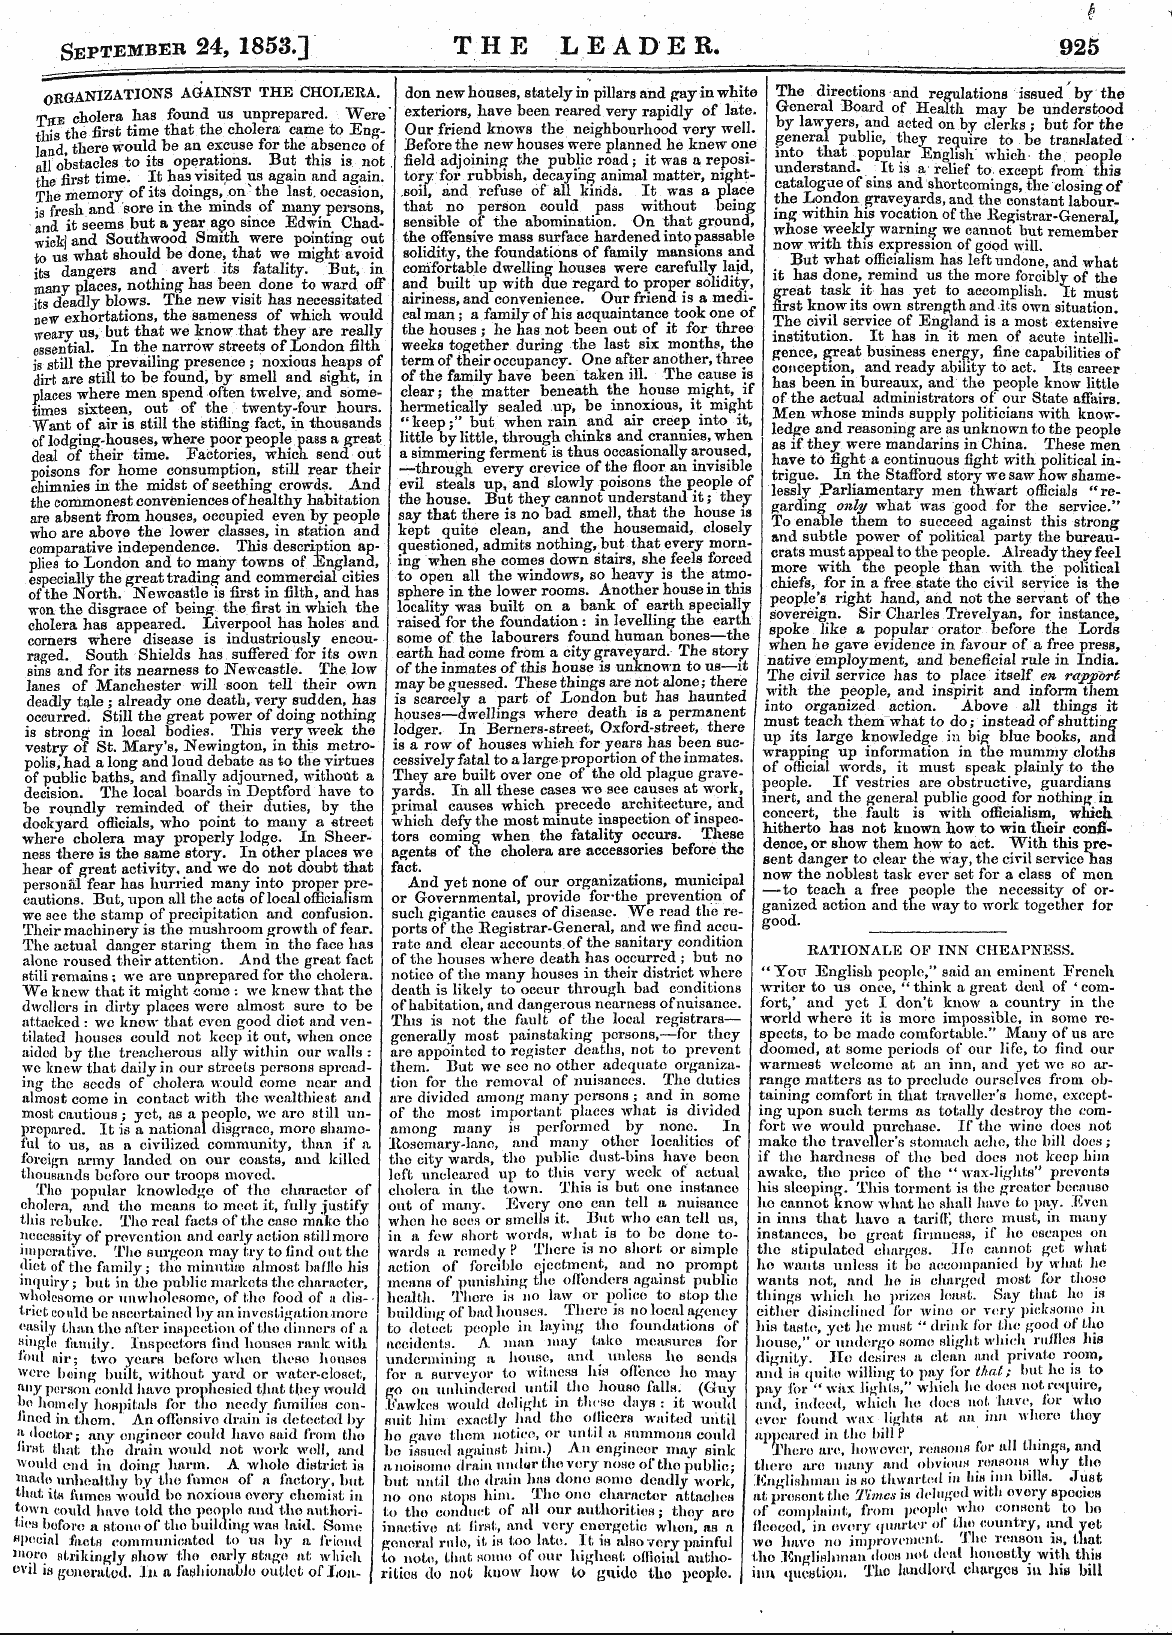 Leader (1850-1860): jS F Y, Country edition - September 24, 1853.] The Leader, 925